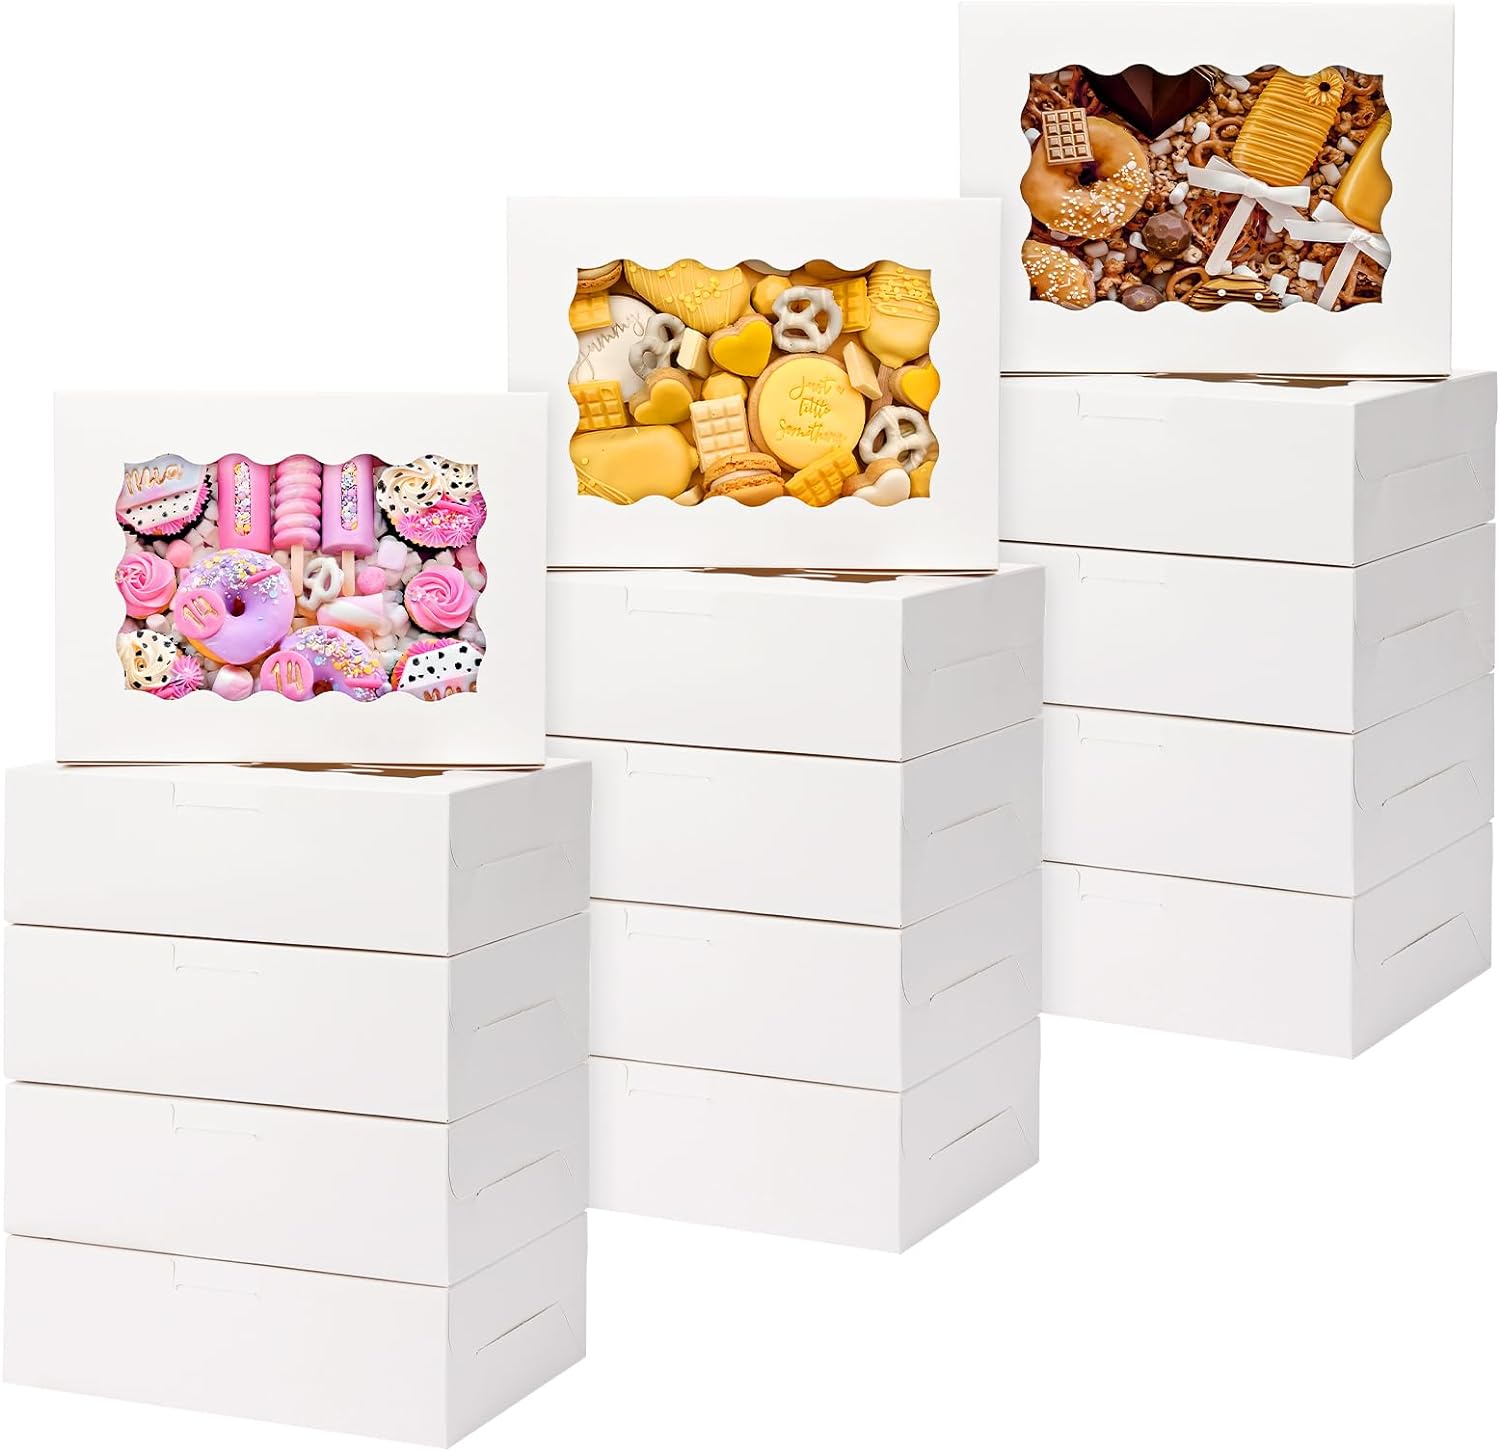 Moretoes 15pcs Cookie Boxes with Window, 8x6x2.5in Treat Boxes, Small Bakery Boxes Dessert Boxes for Chocolate Covered Strawberries, Candies, Cakes